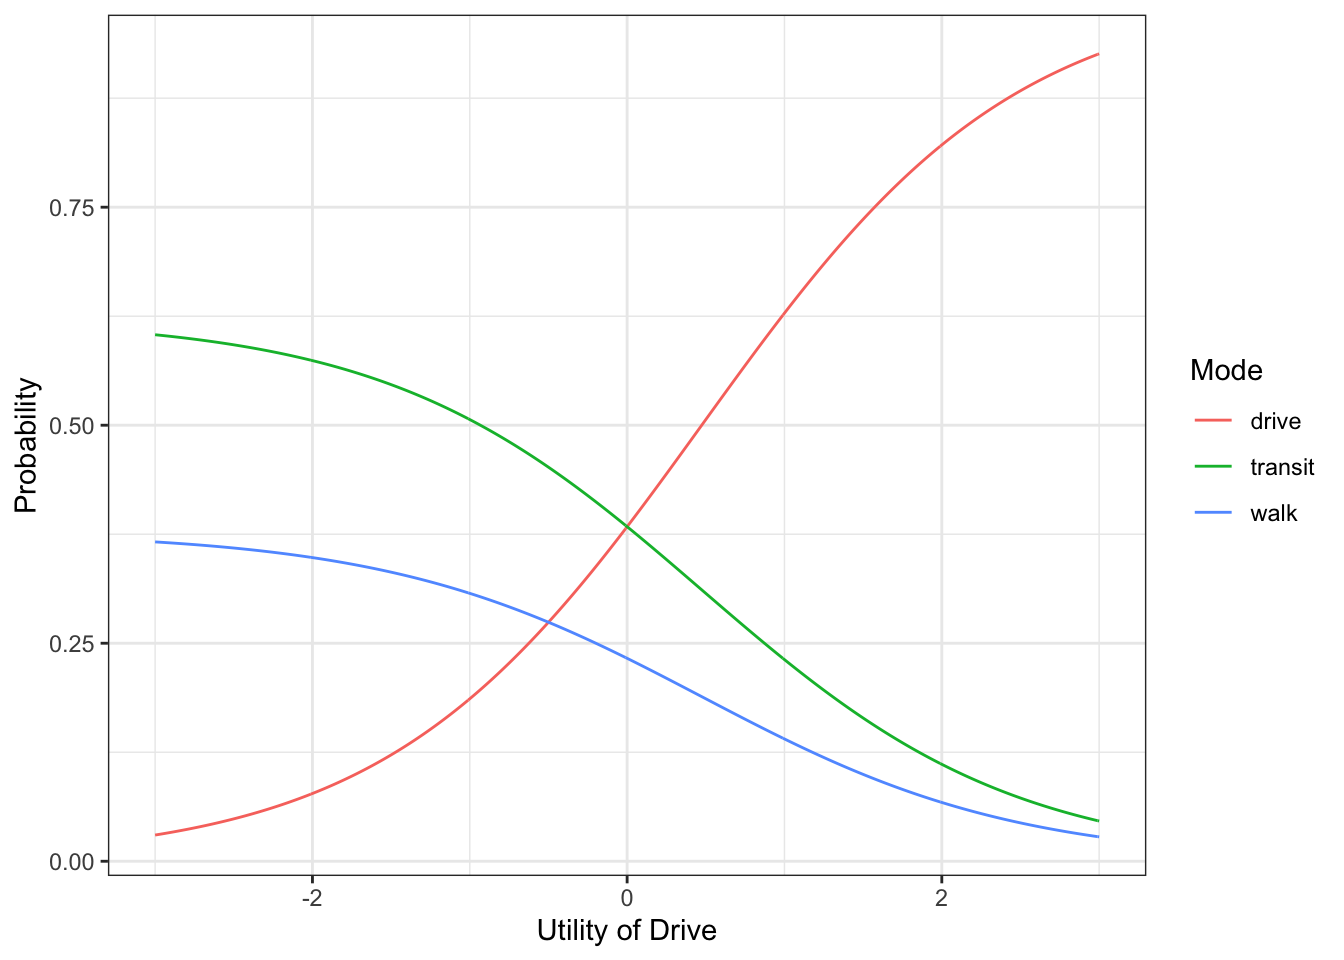 Probability of choosing alternatives while holding other utilities constant, $V_{transit} = 0, V_{walk} = -0.5$